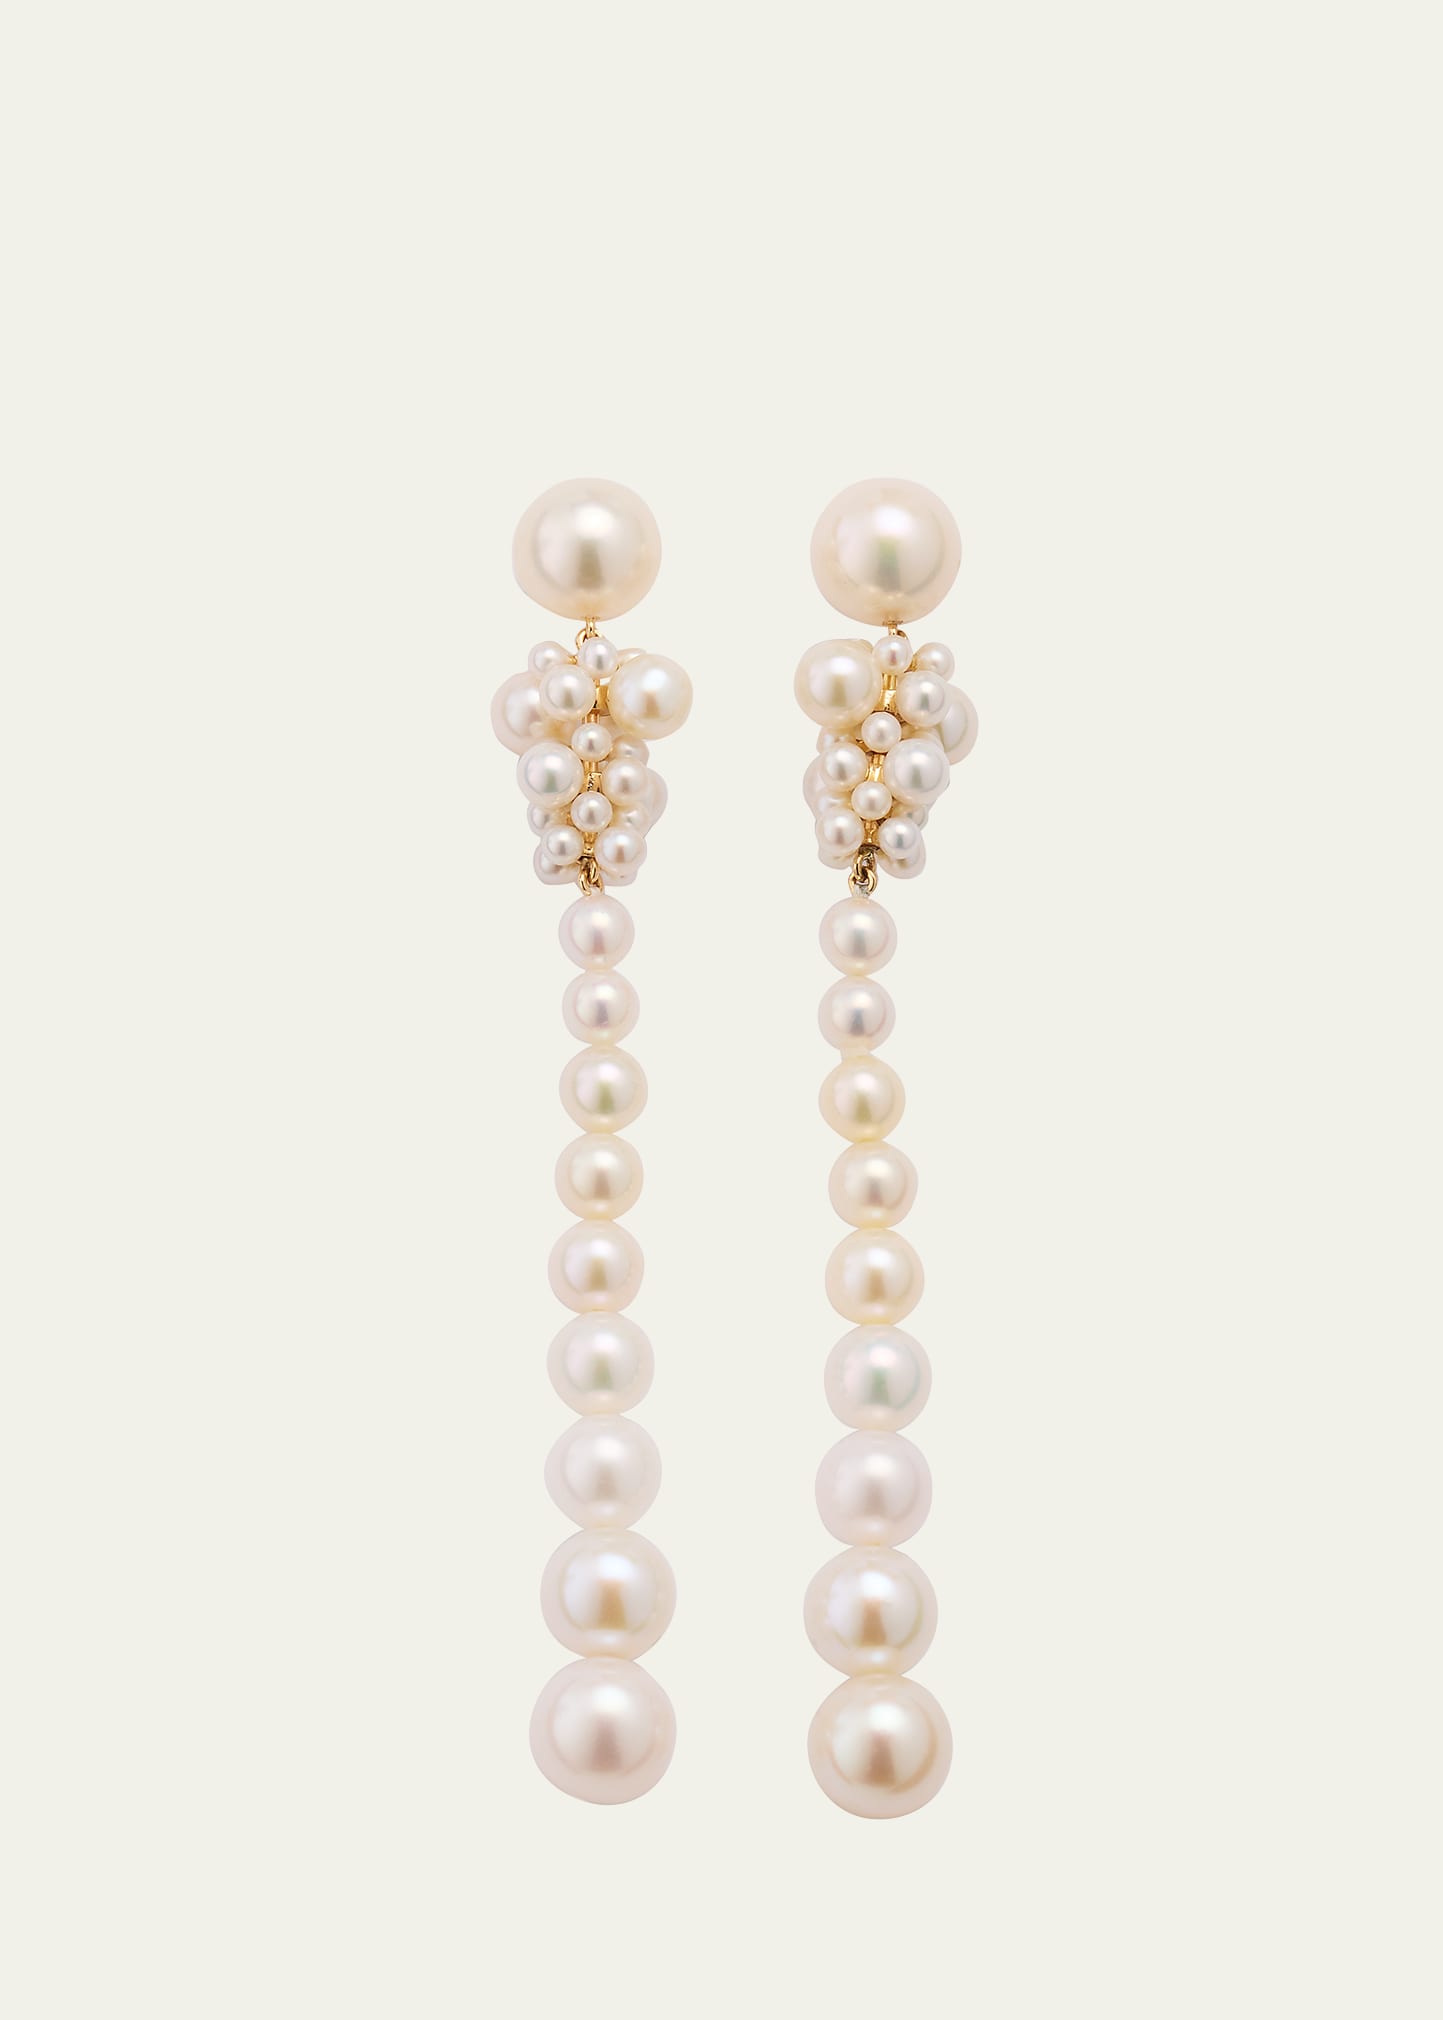 Sophie Bille Brahe 14k Recycled Gold Colona Earrings With Freshwater Pearls In Yg